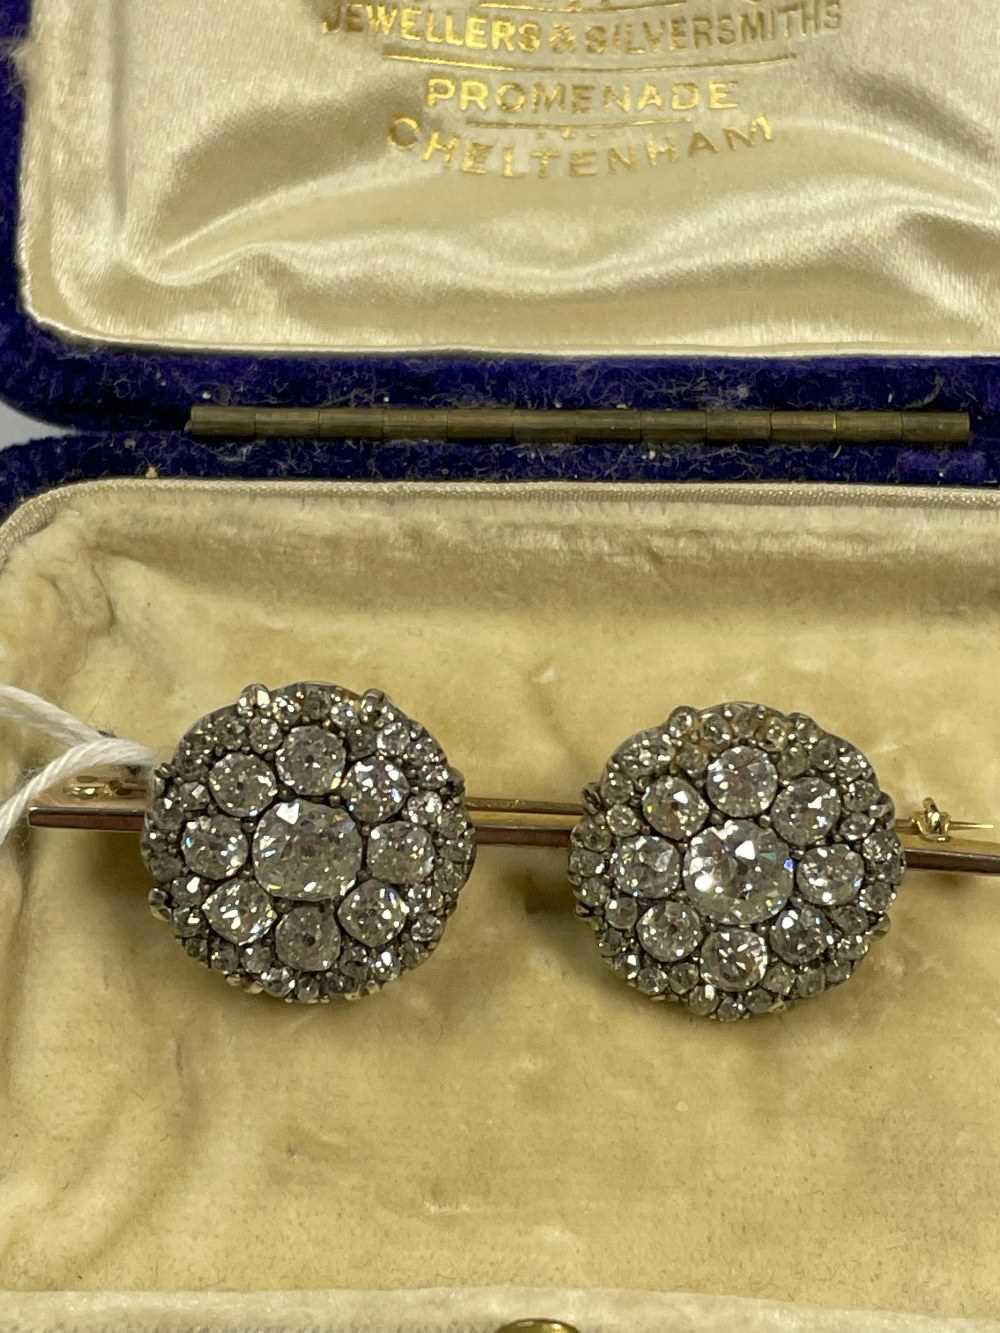 YELLOW METAL DOUBLE FLOWER HEAD DIAMOND BROOCH, each flower head encrusted with graduated old cut - Image 7 of 9